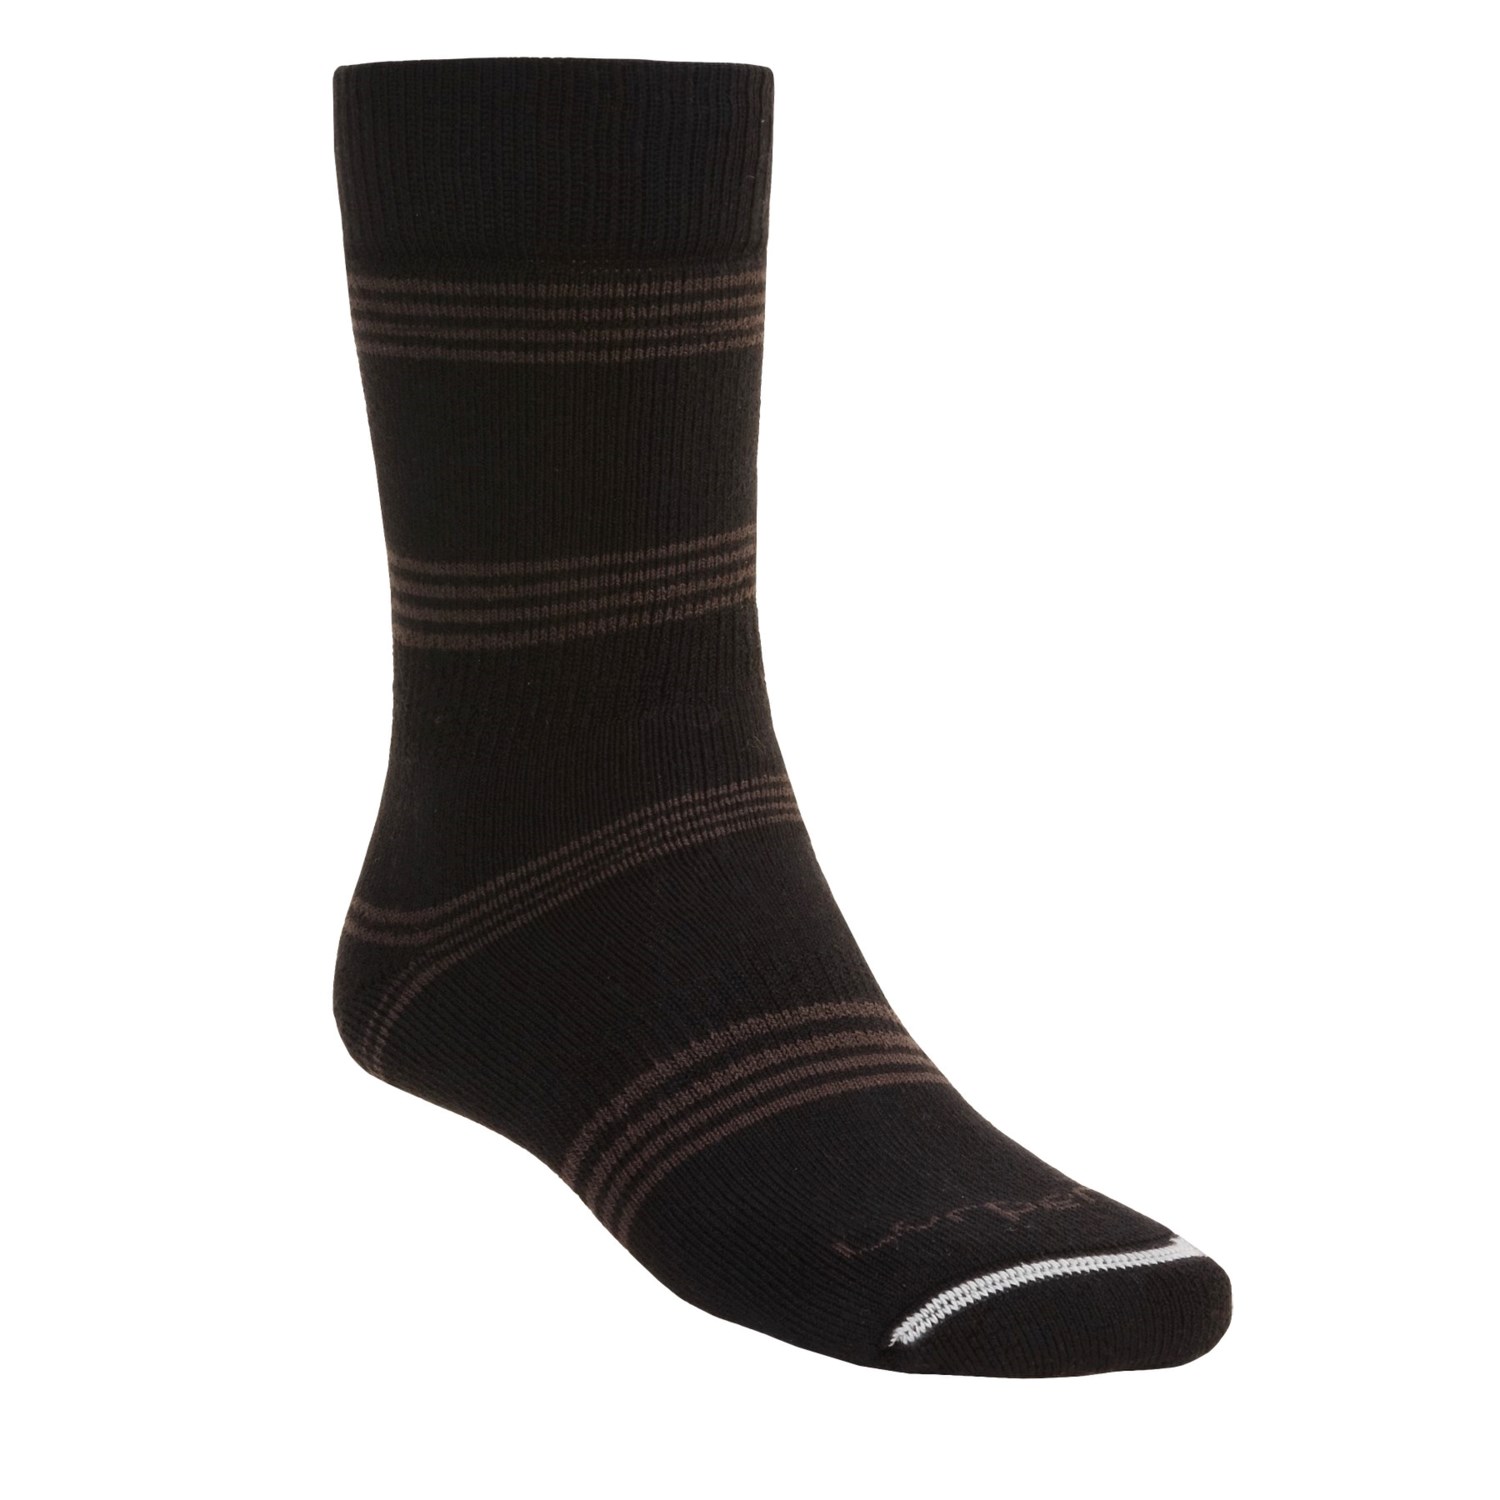 Lorpen Classic Modal Socks  Midweight For Men  Save 36%